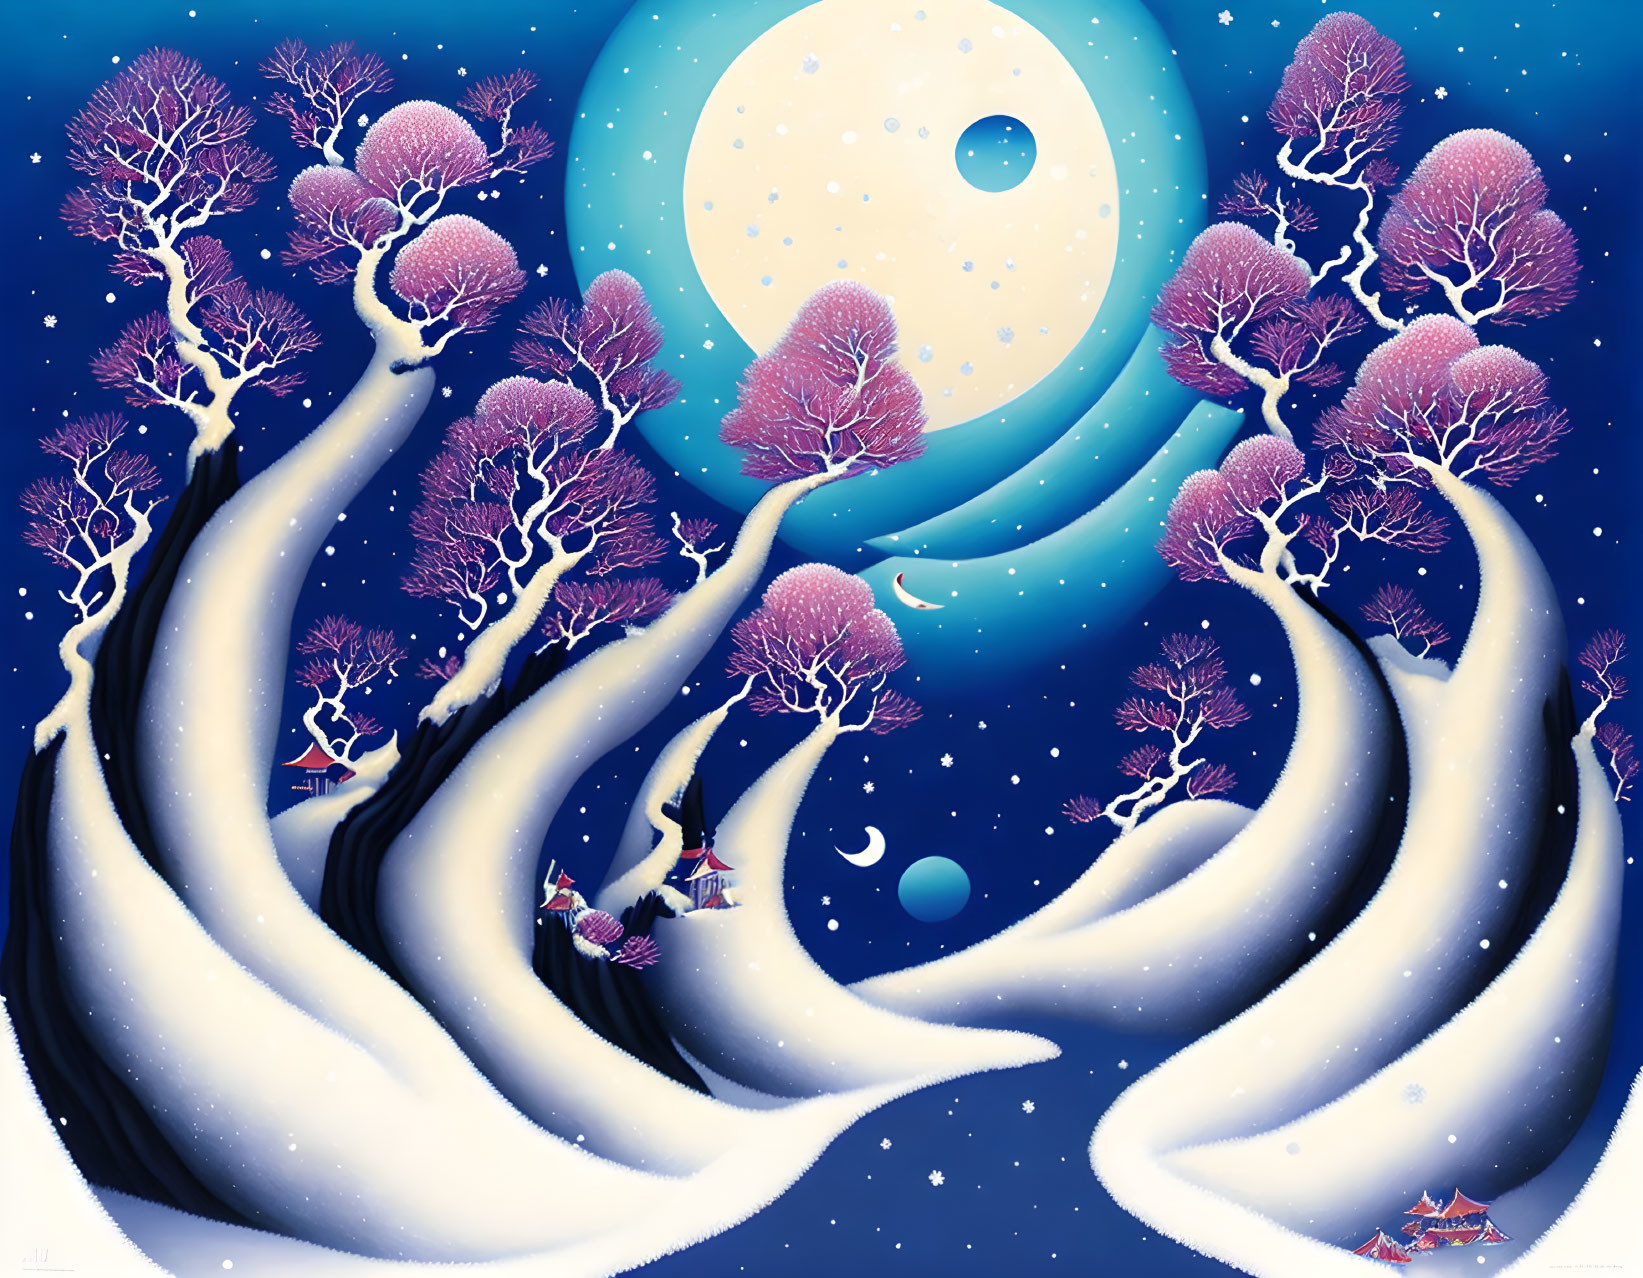 Stylized snowy landscape with twisted trees, moon, yin-yang symbol, and small houses